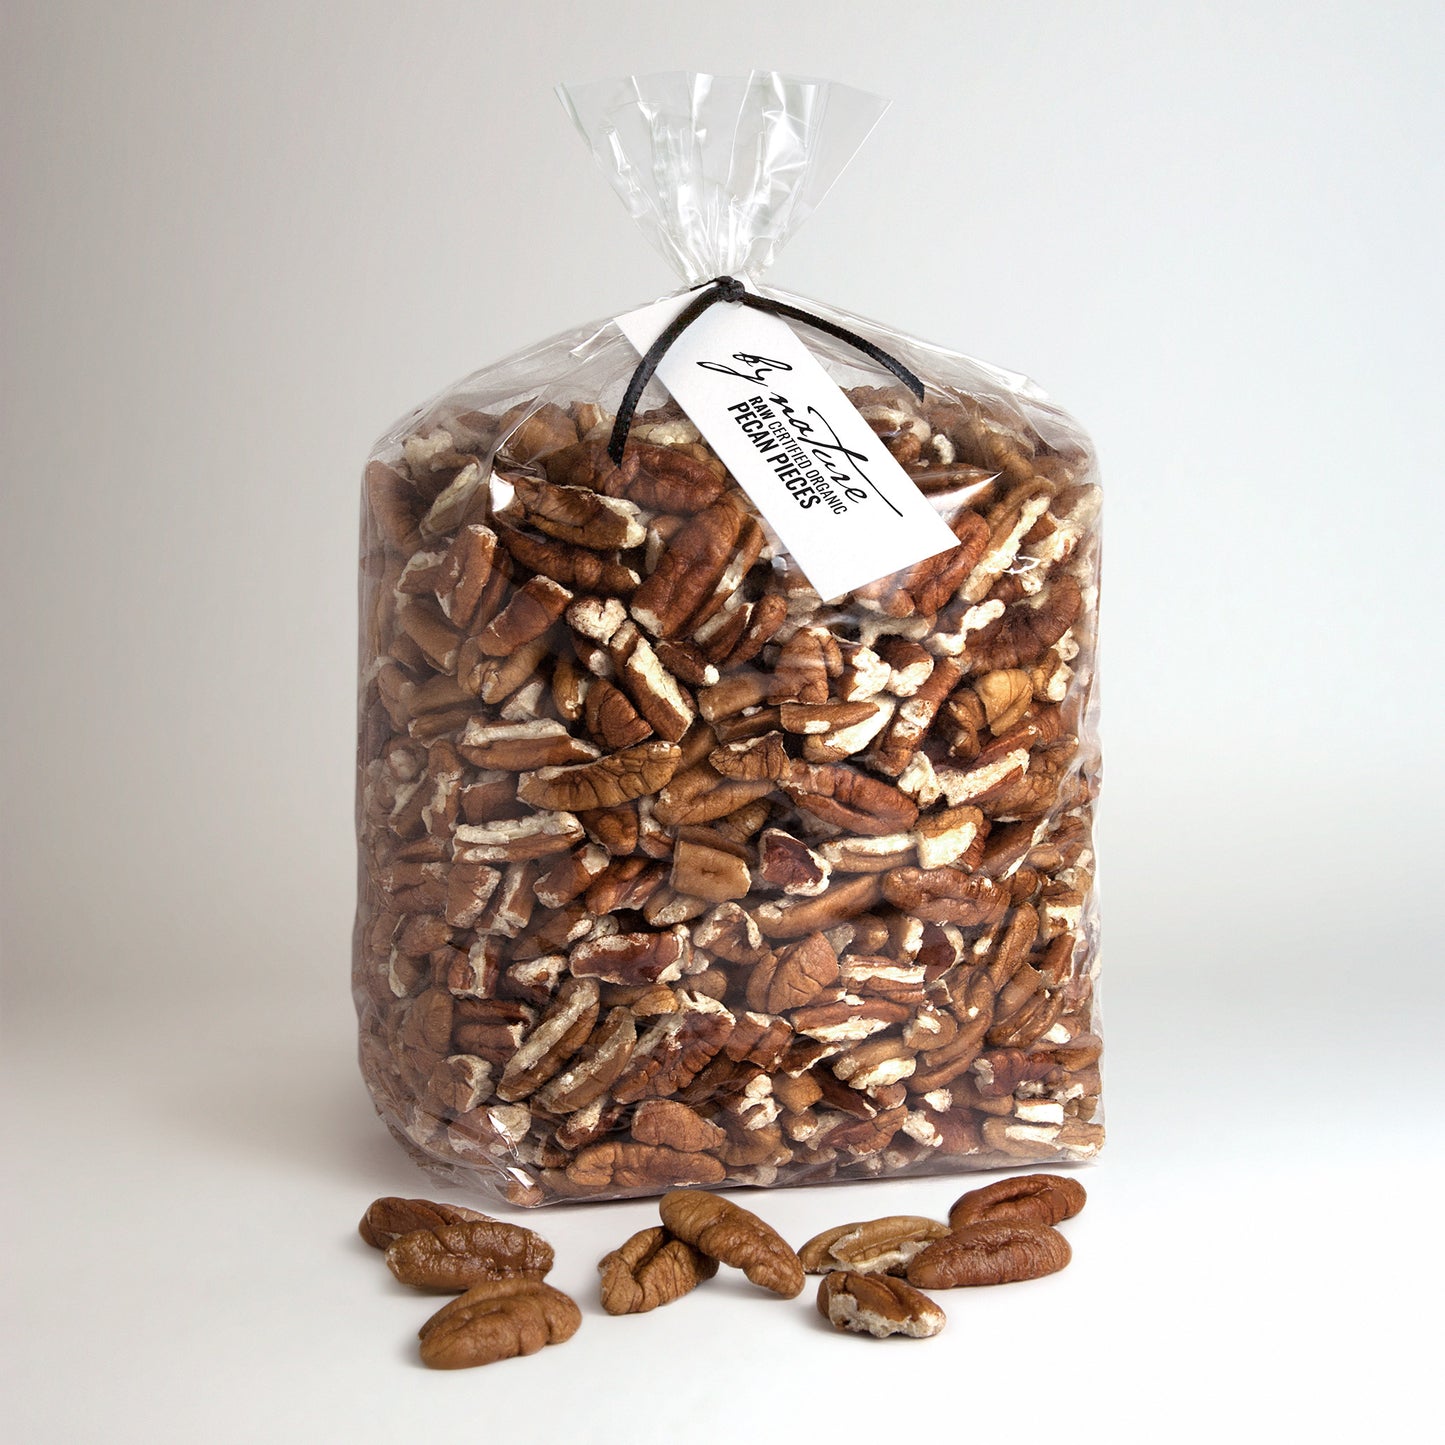 BY NATURE Pecan Pieces, 1kg - raw, certified organic at source.